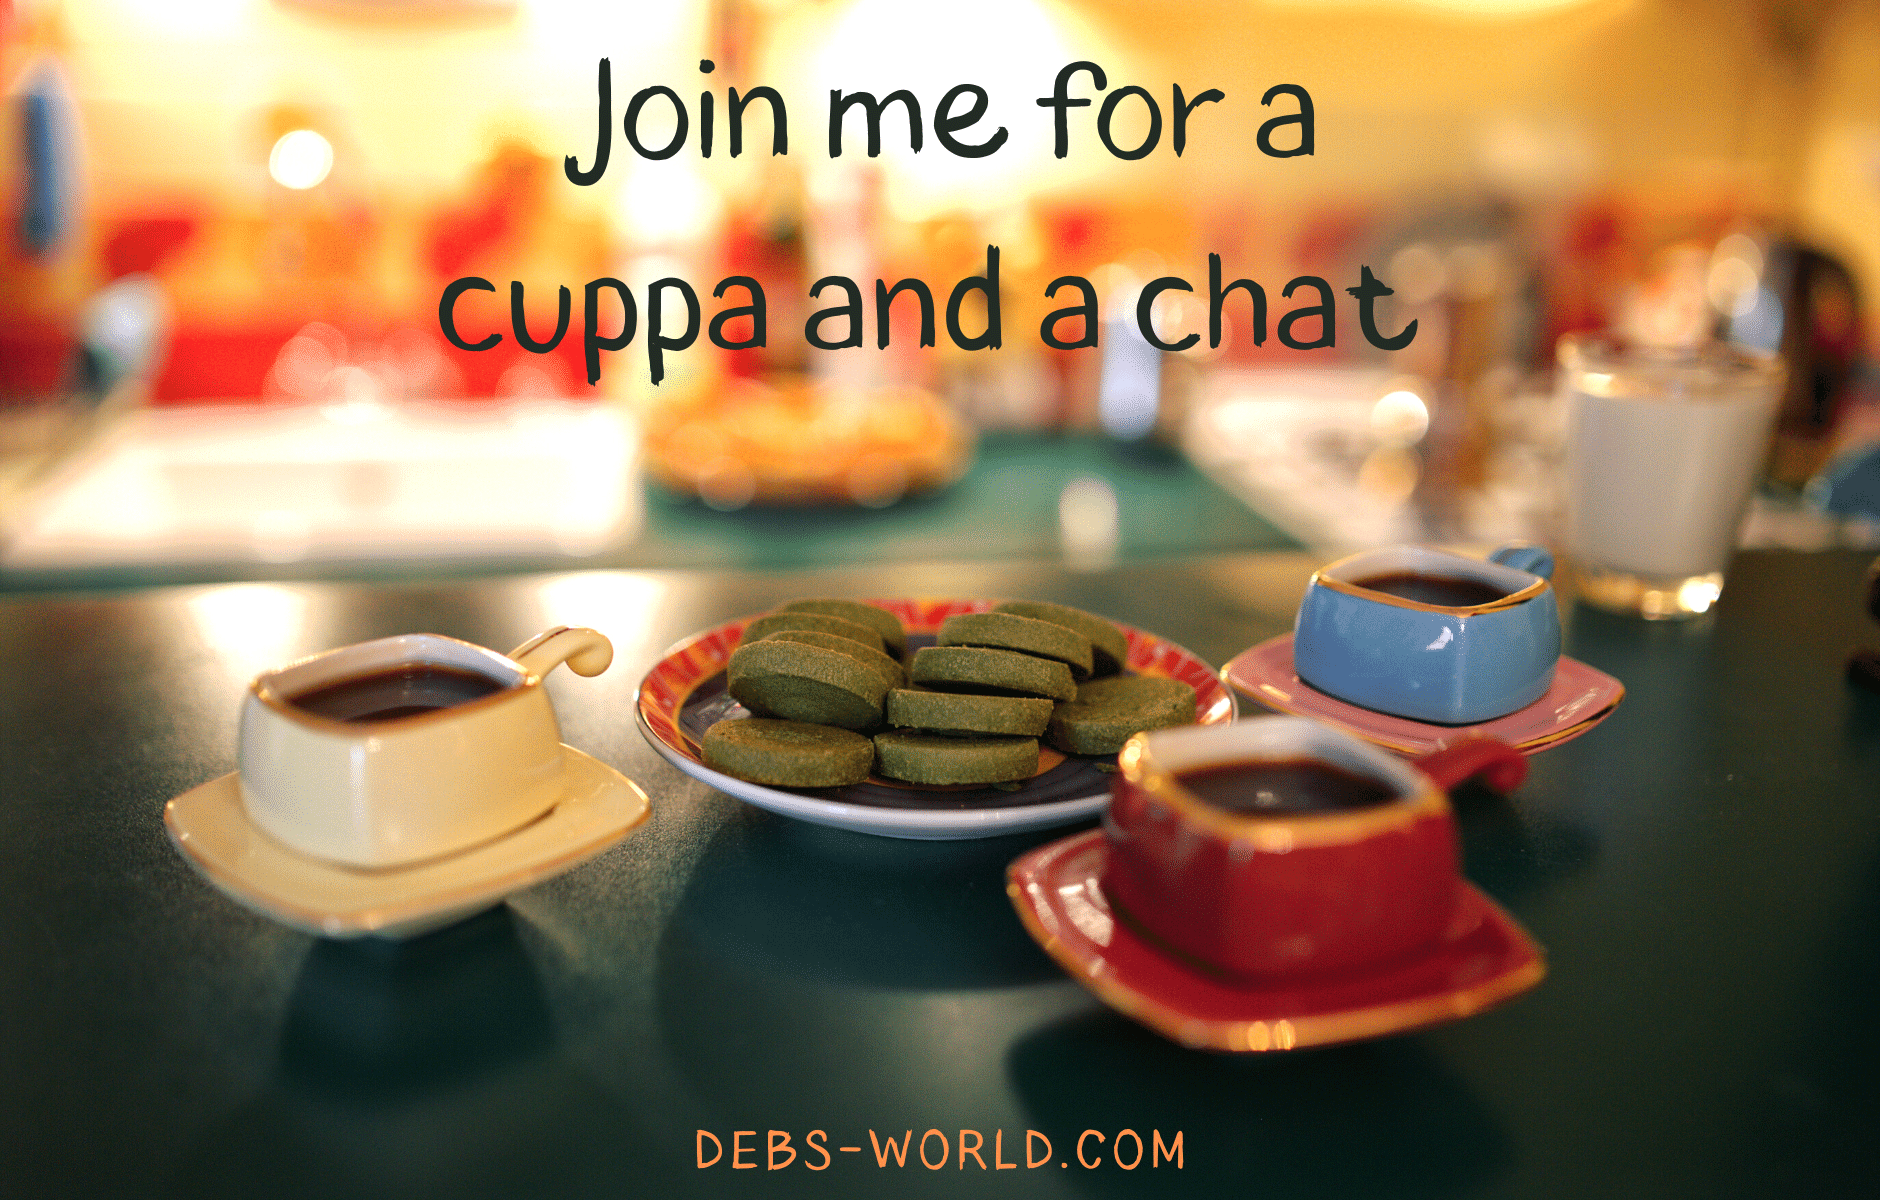 Join me for a cuppa and a chat